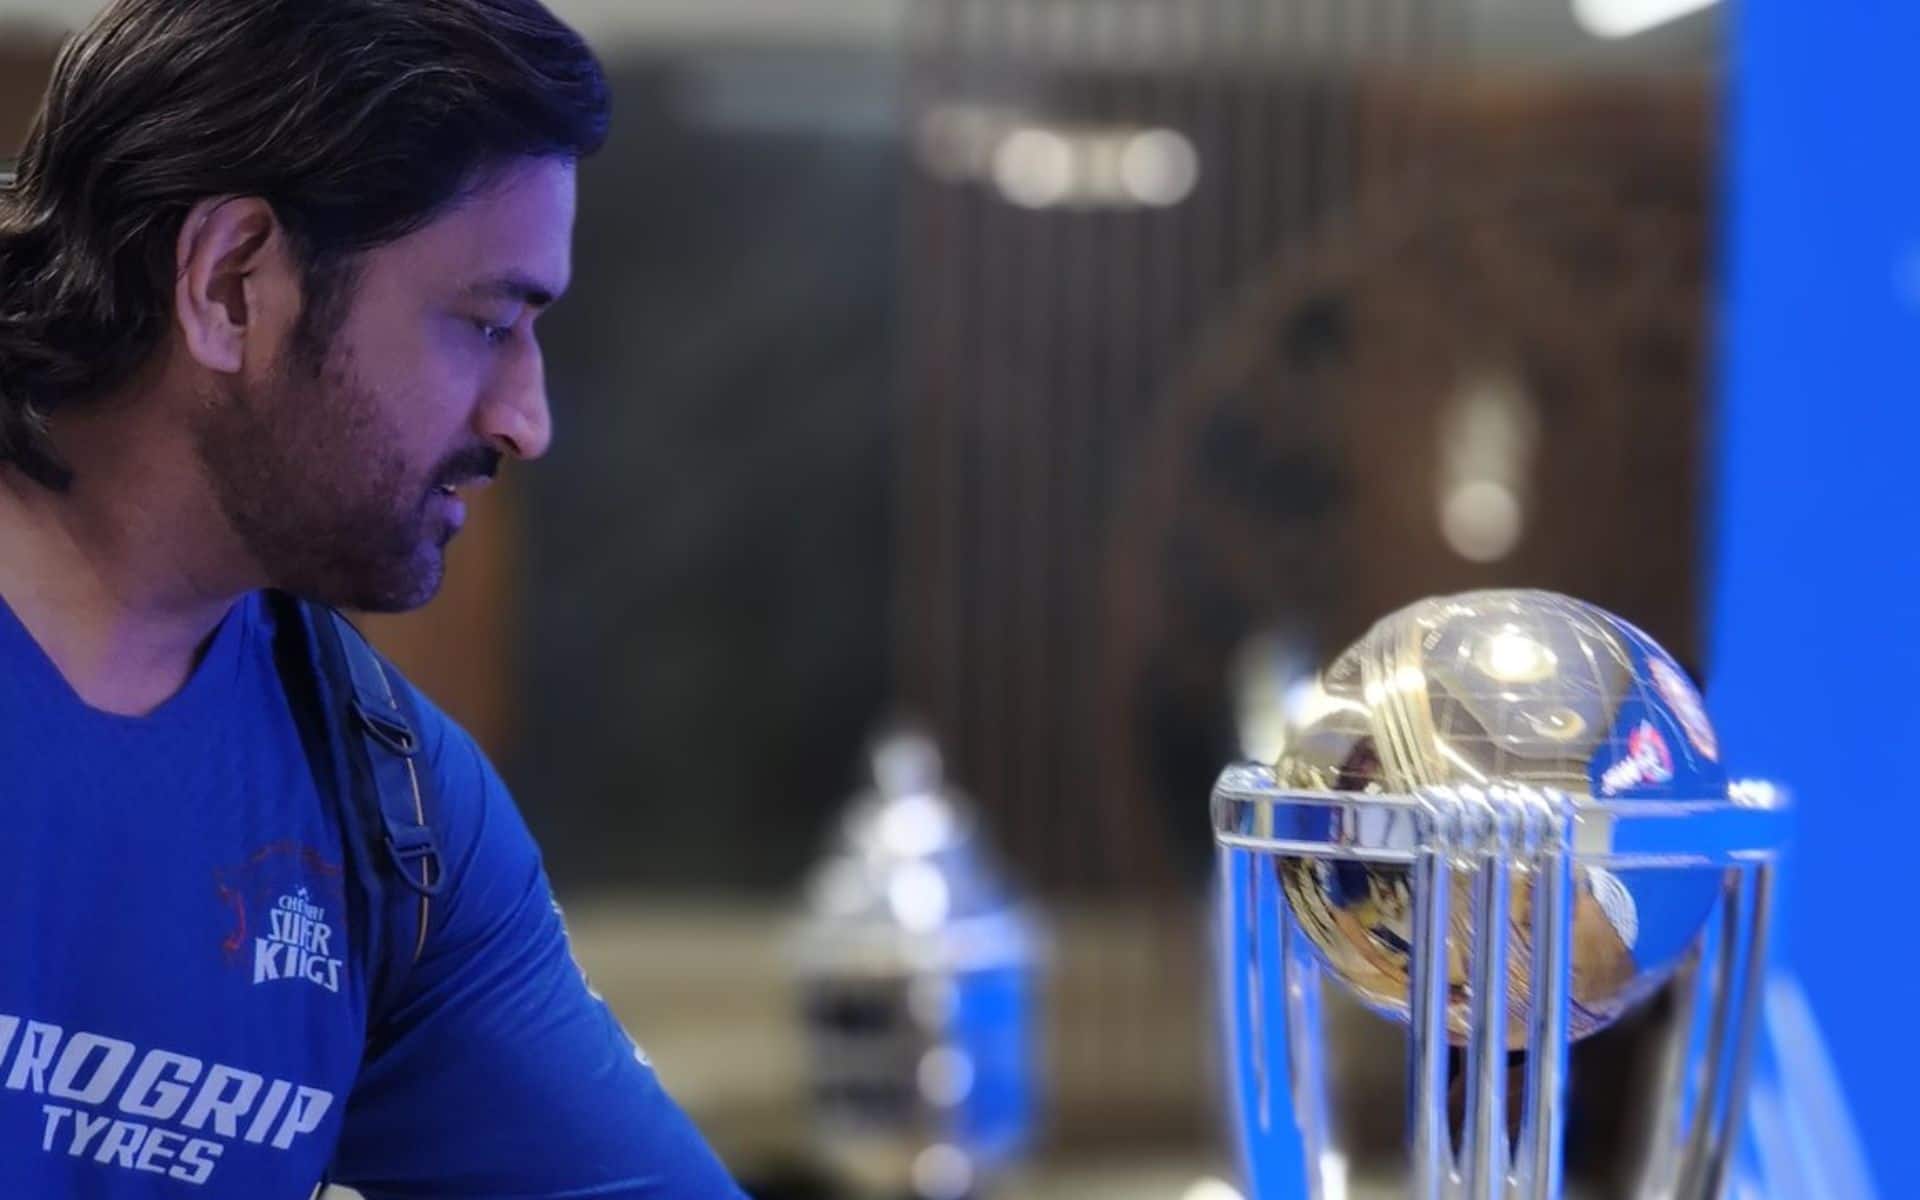 MS Dhoni looking at WC 2011 trophy at BCCI HQ in Mumbai (x.com)